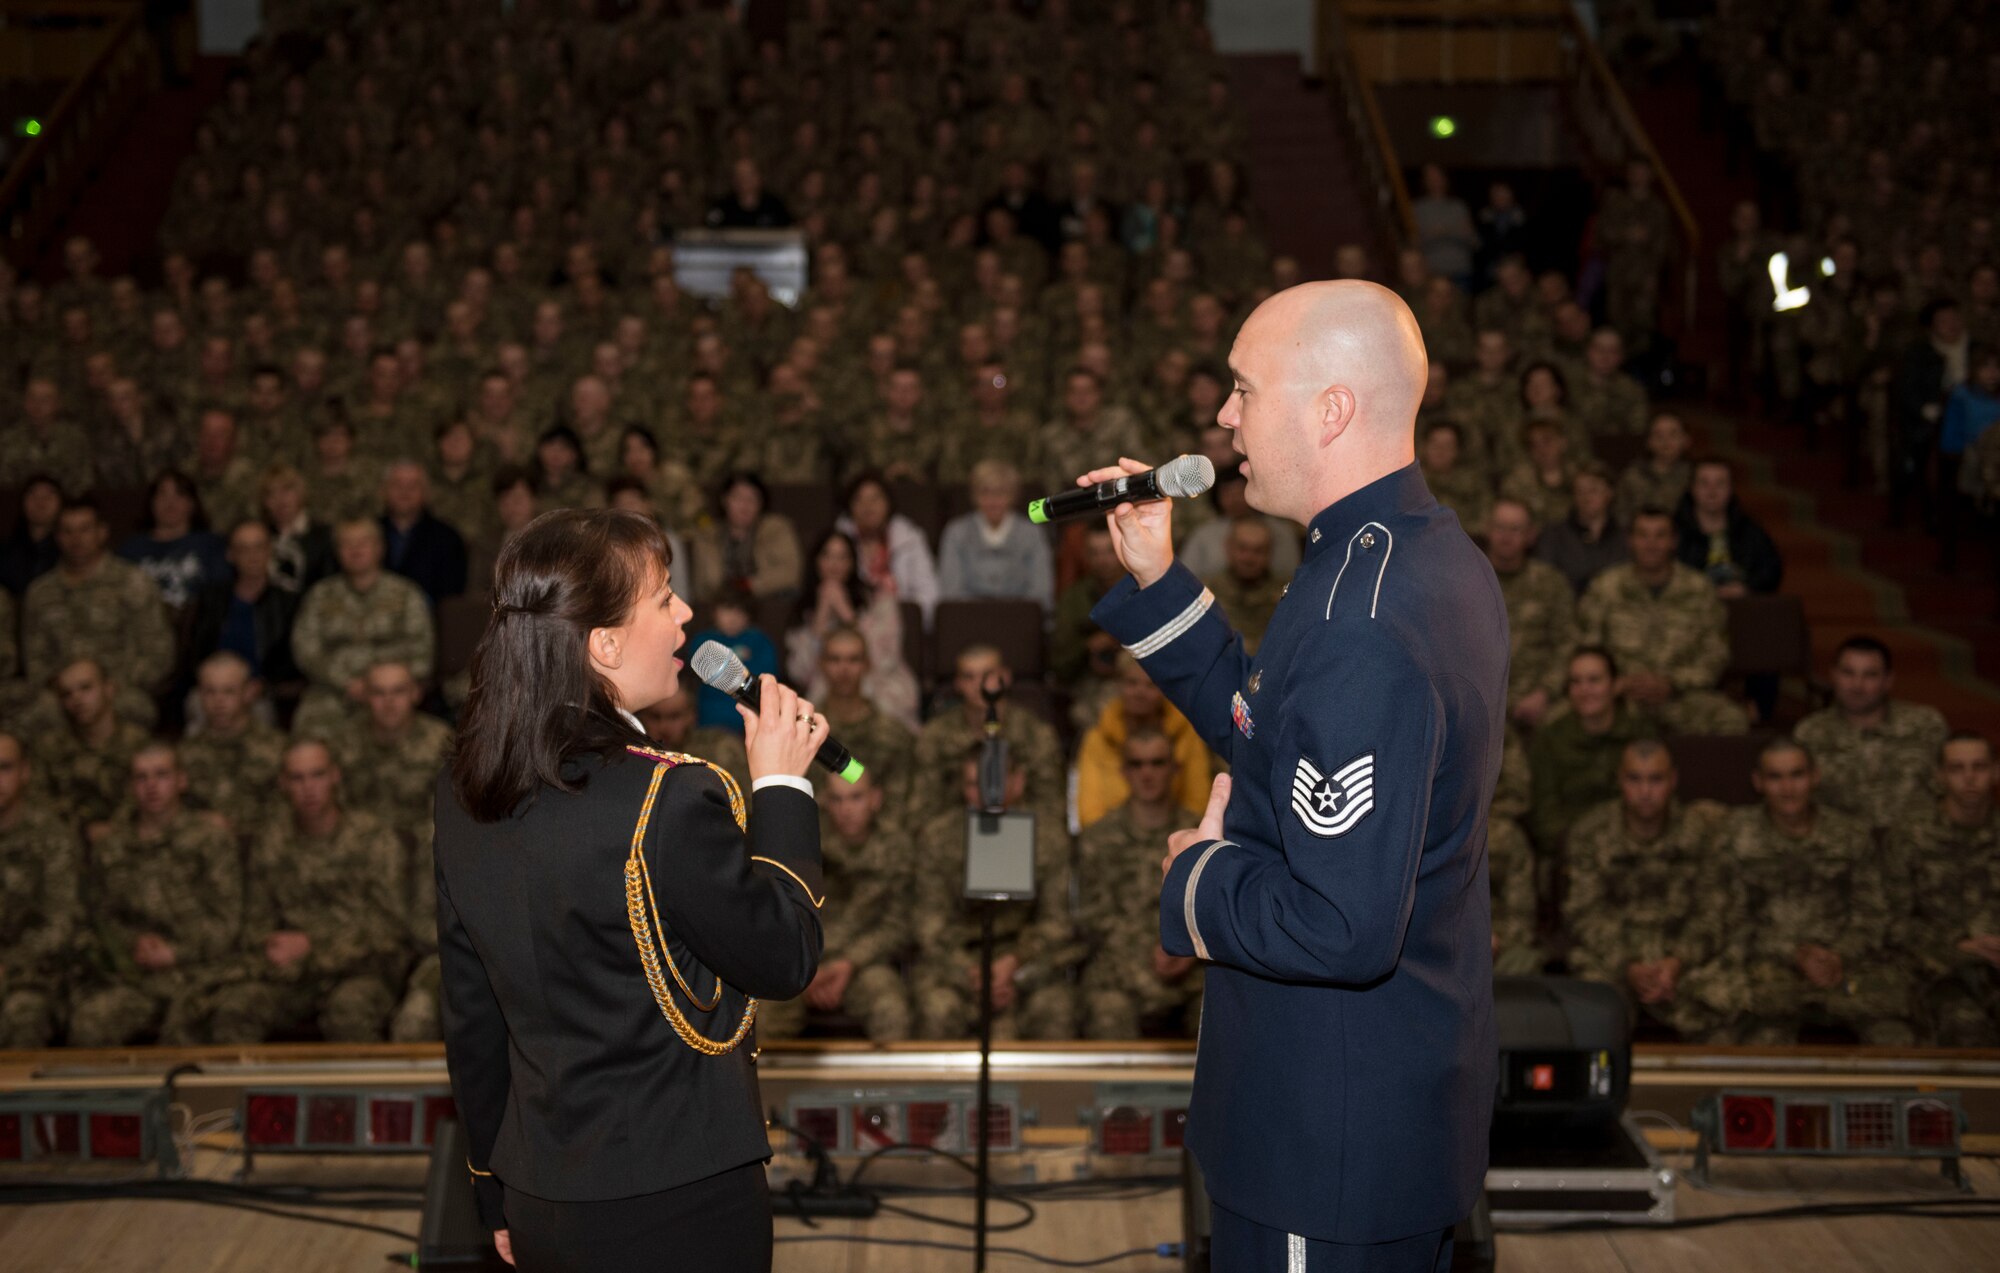 U.S. Air Force Tech. Sgt. Ben Huseby, U.S. Air Forces in Europe Ambassadors Jazz Band vocalist, and Irina Kulik, Ukrainian National Presidential Orchestra vocalist, perform a duet during a concert with the USAFE Band and Ukrainian National Presidential Orchestra at the 169th Training Center in Desna, Ukraine, Oct. 16, 2019. The USAFE Band traveled to six cities in central and western Ukraine October 6-20, 2019 to conduct the “Music of Freedom” tour, which celebrated the shared spirit of freedom and enduring partnership between U.S. and Ukrainian armed forces. (U.S. Air Force photo by Airman 1st Class Jennifer Zima)